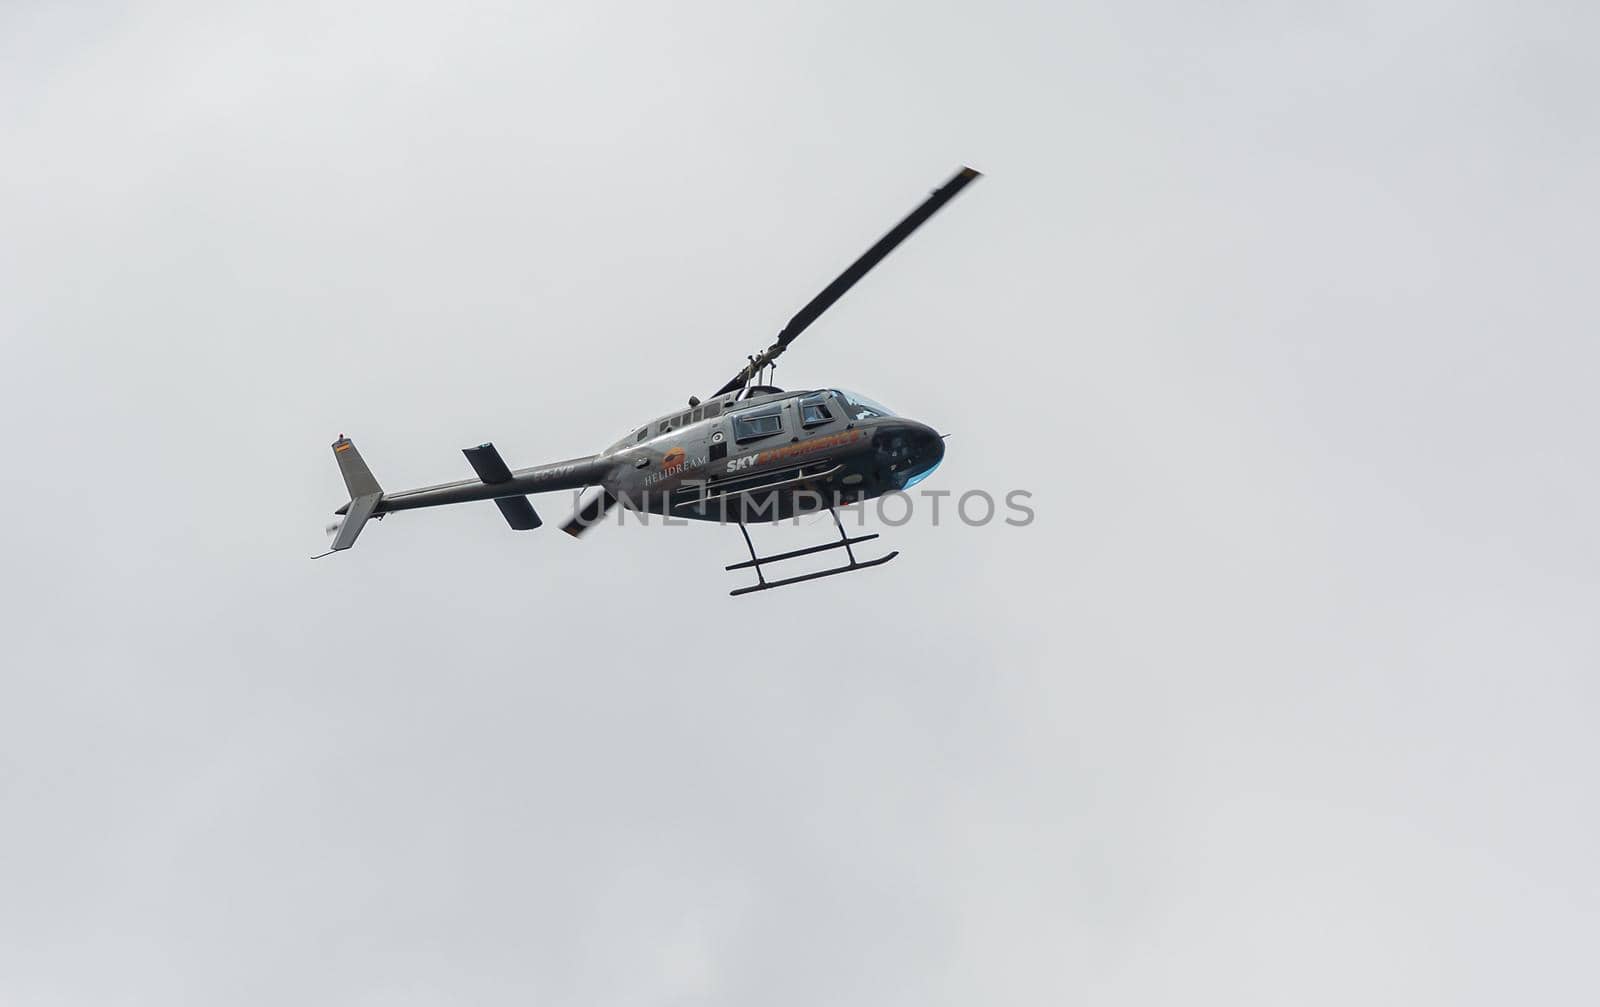 Tenerife, Spain - 05/17/2018: Helicopter in flight. Stock photo